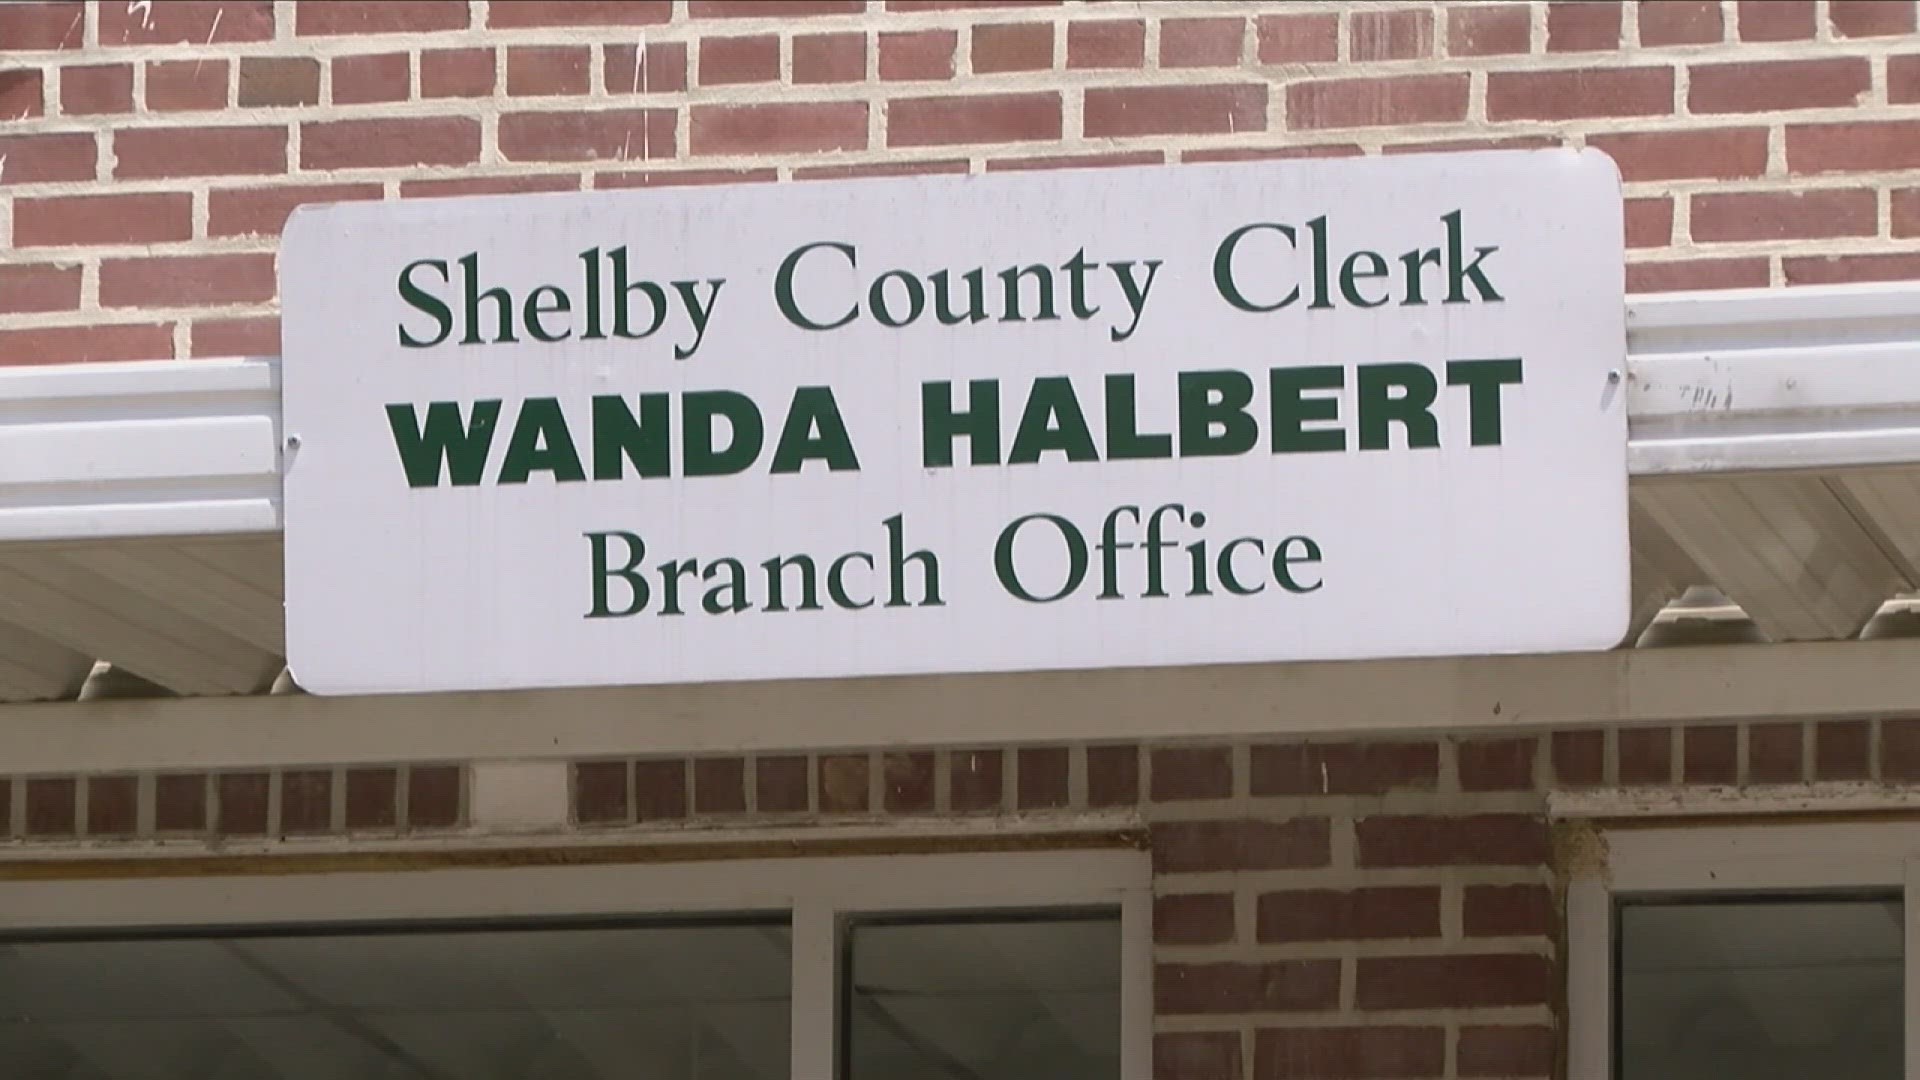 The Shelby county commission passed a resolution that would require that Halbert appear before the body to address new concerns.